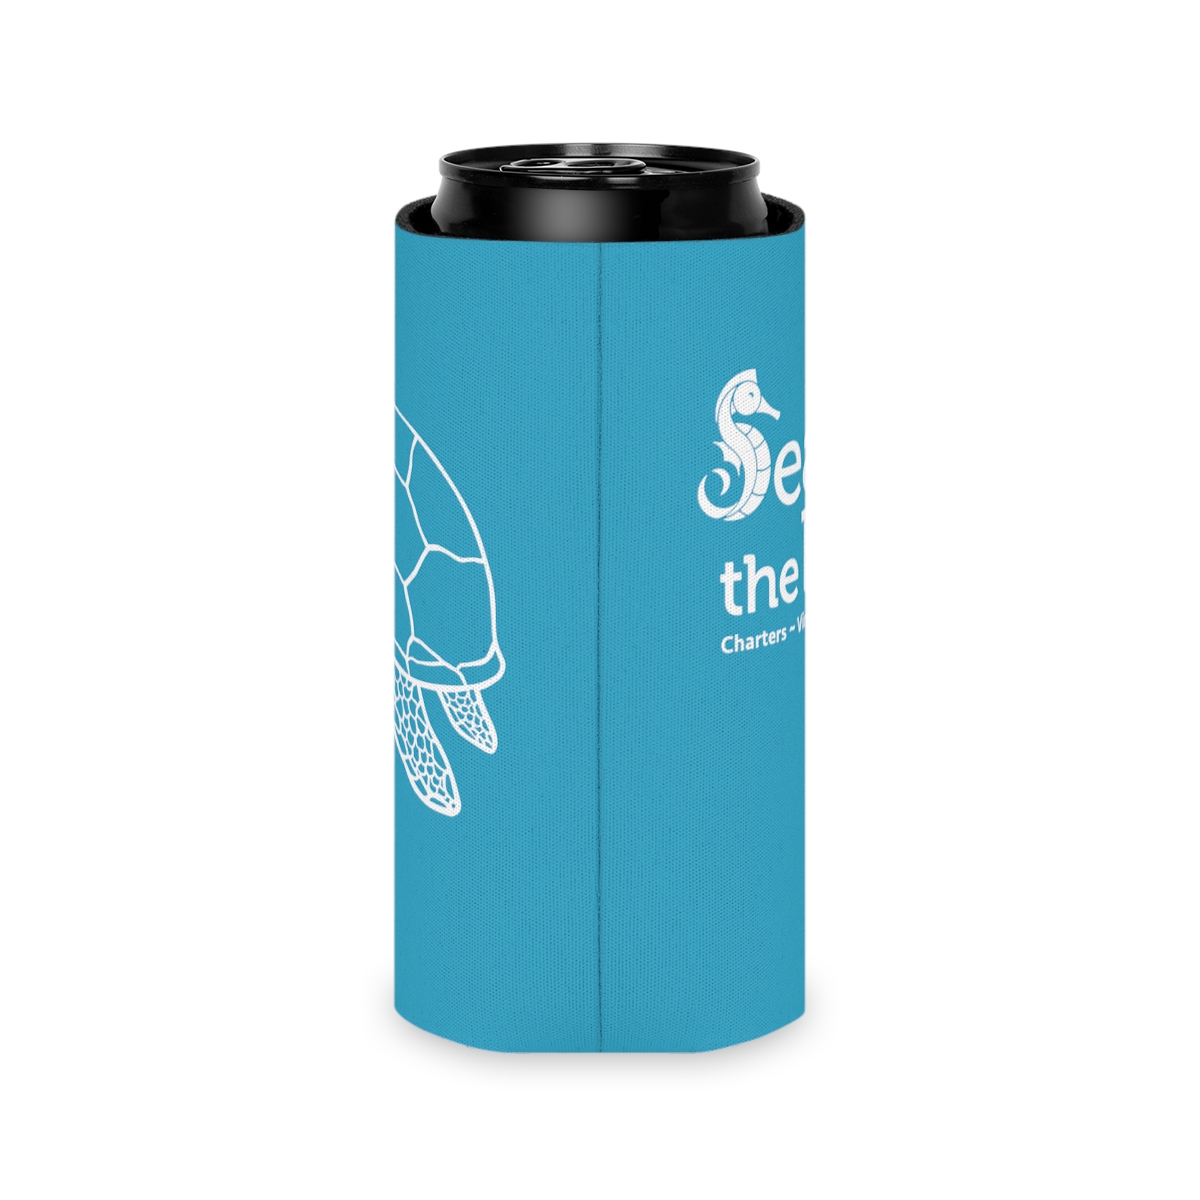 Sea Turtle Can Koozie - Turquoise product thumbnail image